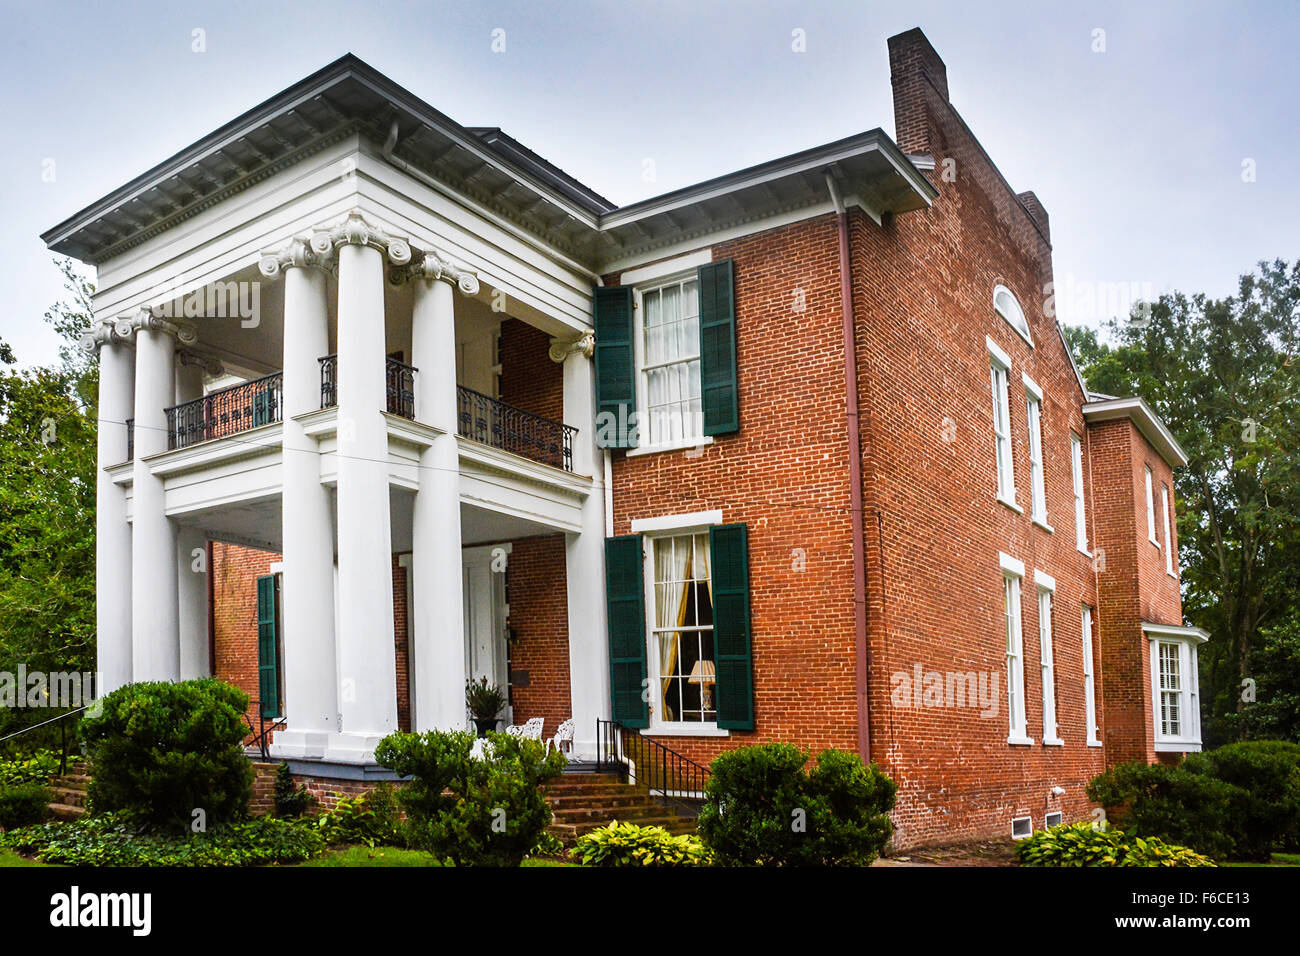 The 'Columns', a historically significant and impressive Greek Revival mansion used as a hospital by Union Army during the Civil war, Bolivar, TN Stock Photo